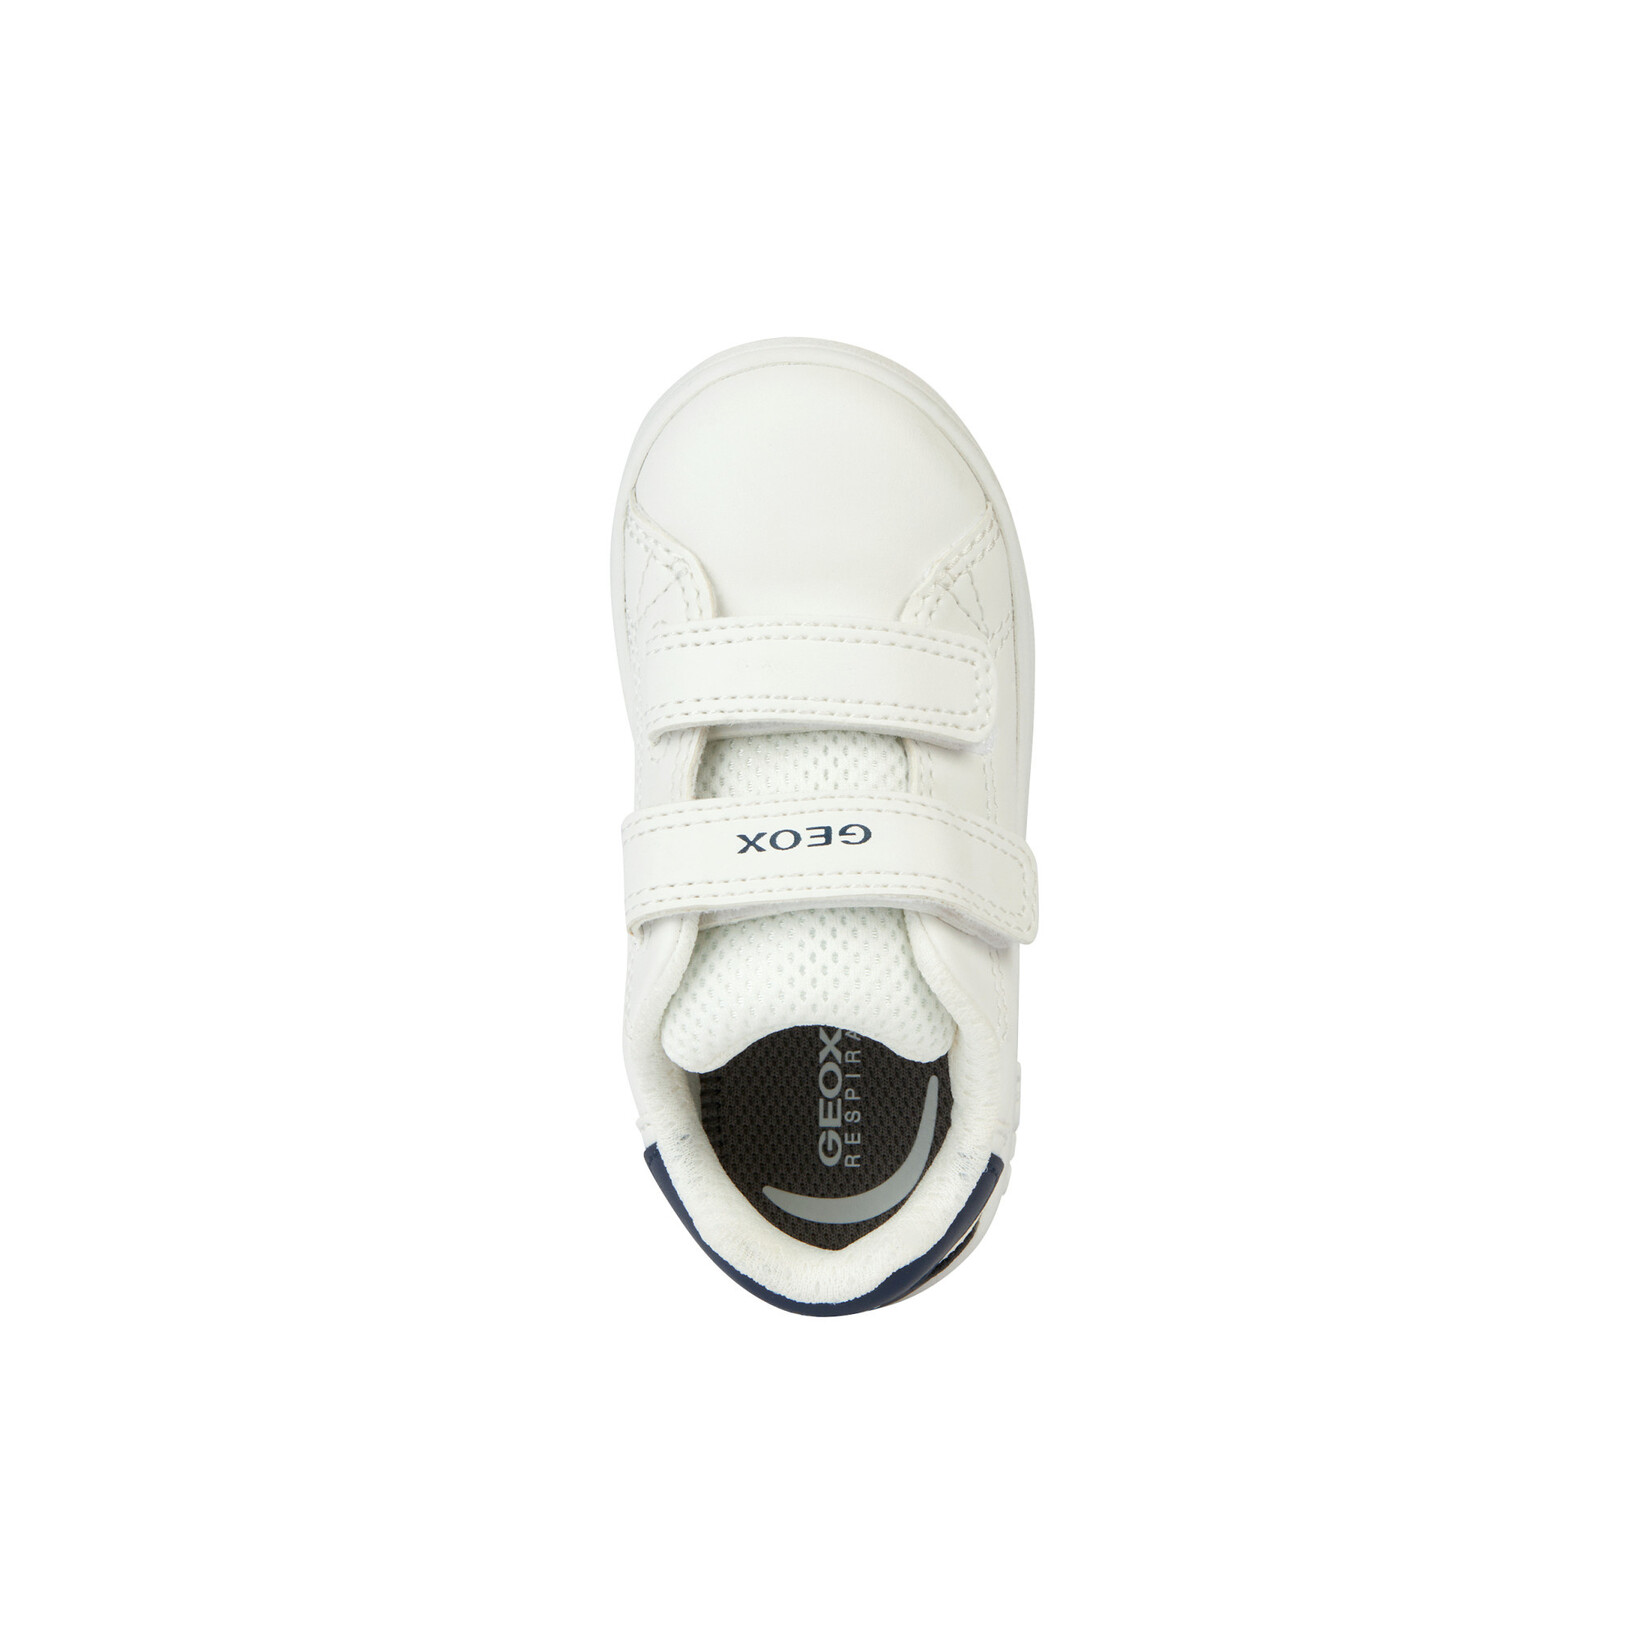 Geox GEOX - Synthetic Leather Sneakers 'B. ECLYPER' - White/Navy